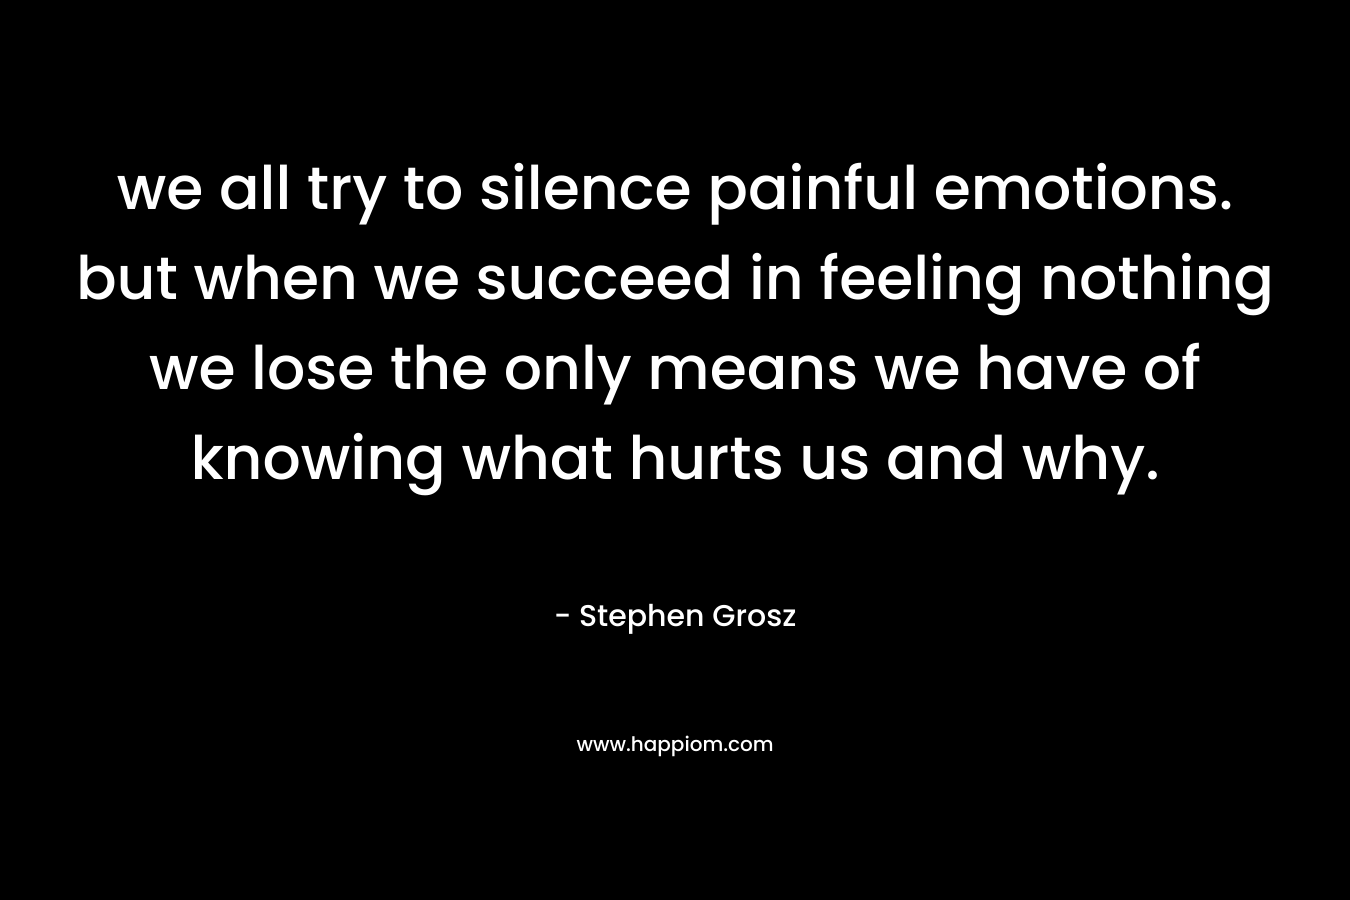 we all try to silence painful emotions. but when we succeed in feeling nothing we lose the only means we have of knowing what hurts us and why.